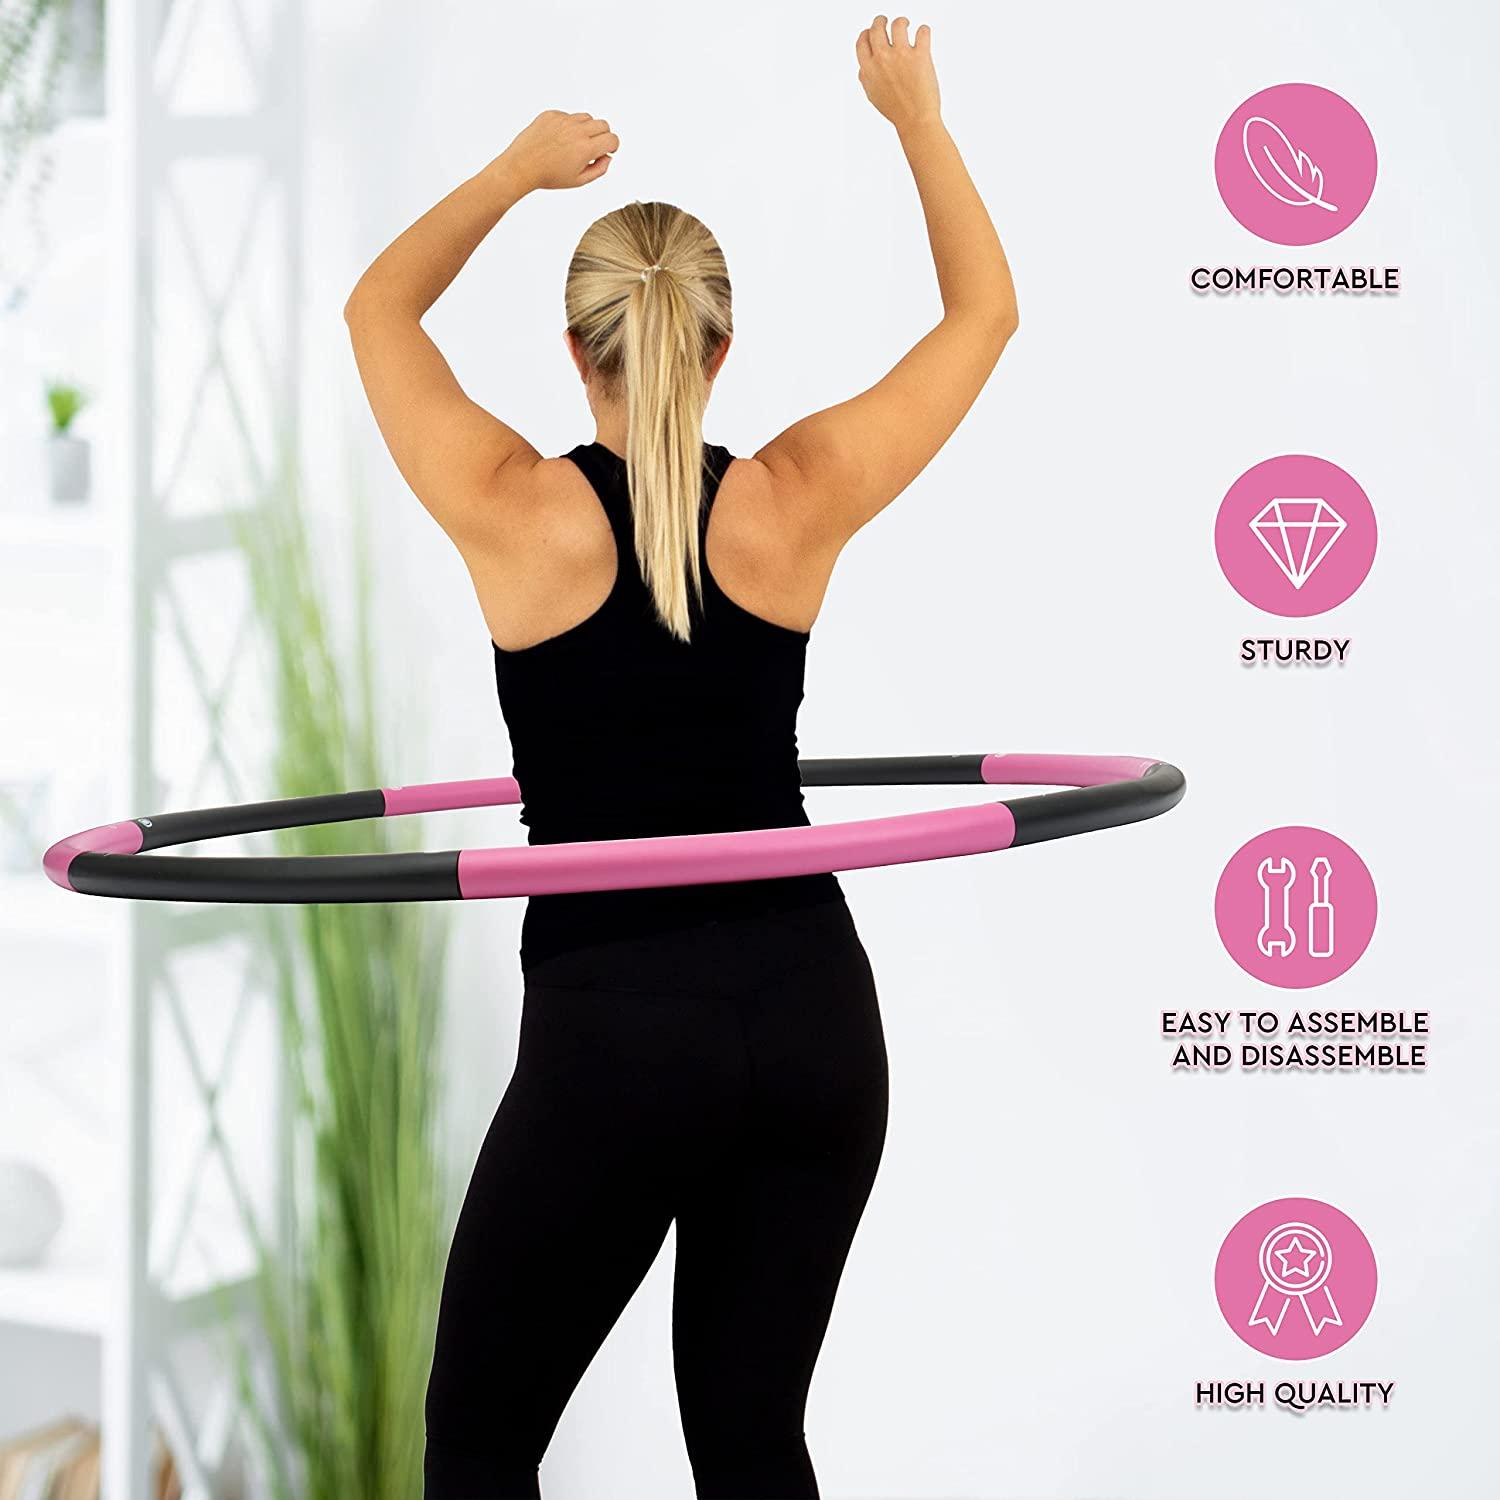 Hula hoop your way to fitness - Times of India